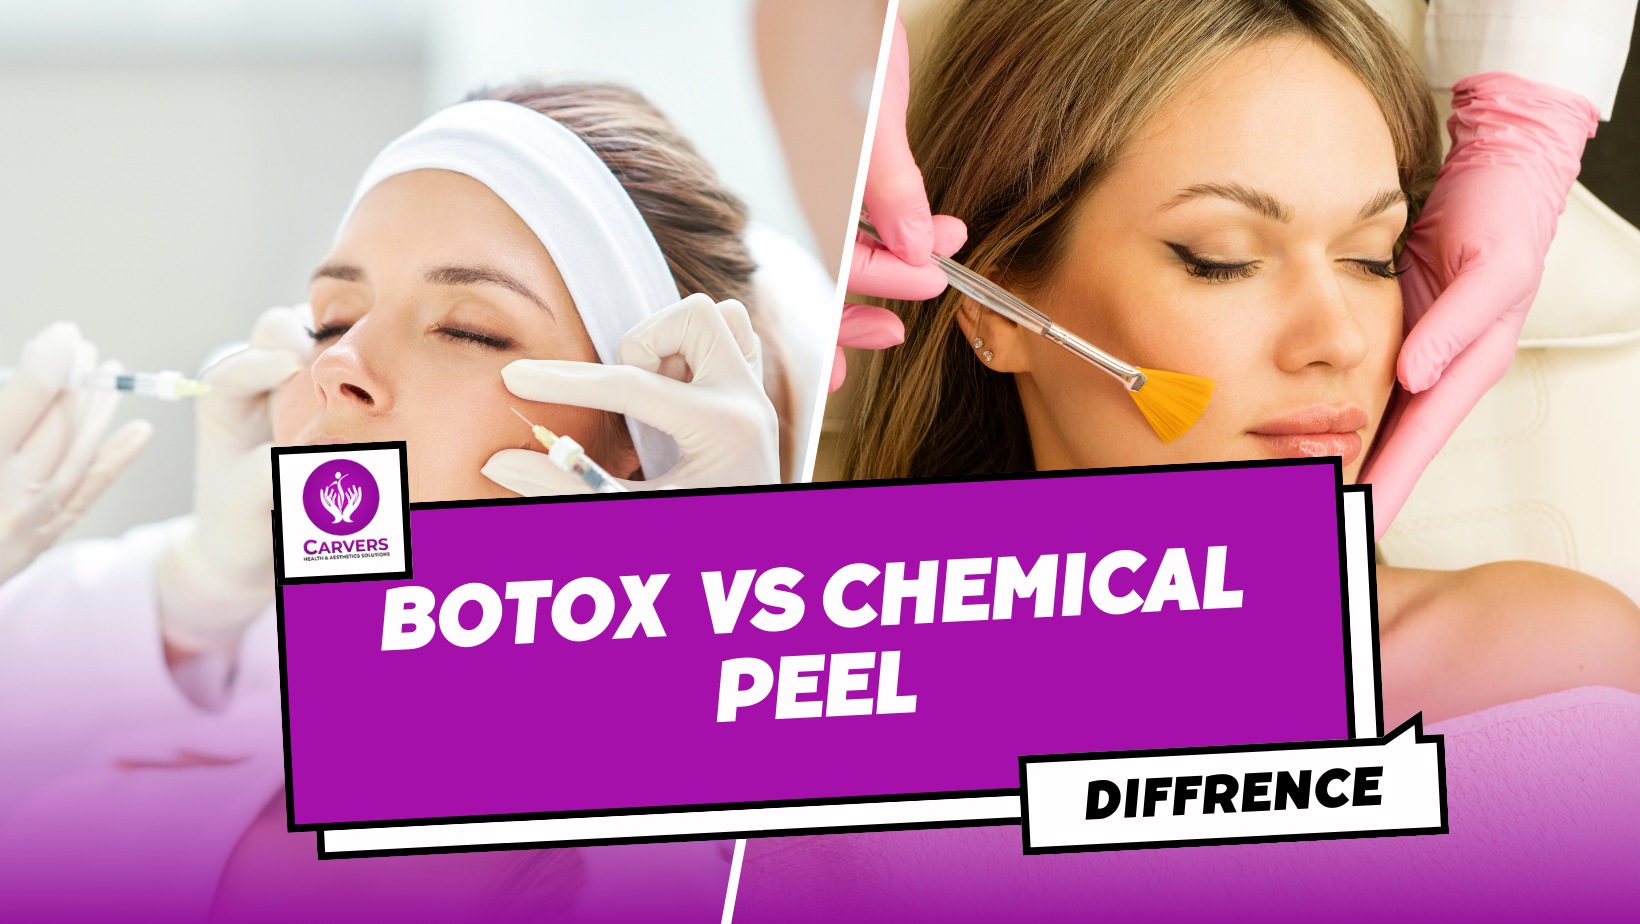 Botox Vs Chemical Peels: What Is The Difference?